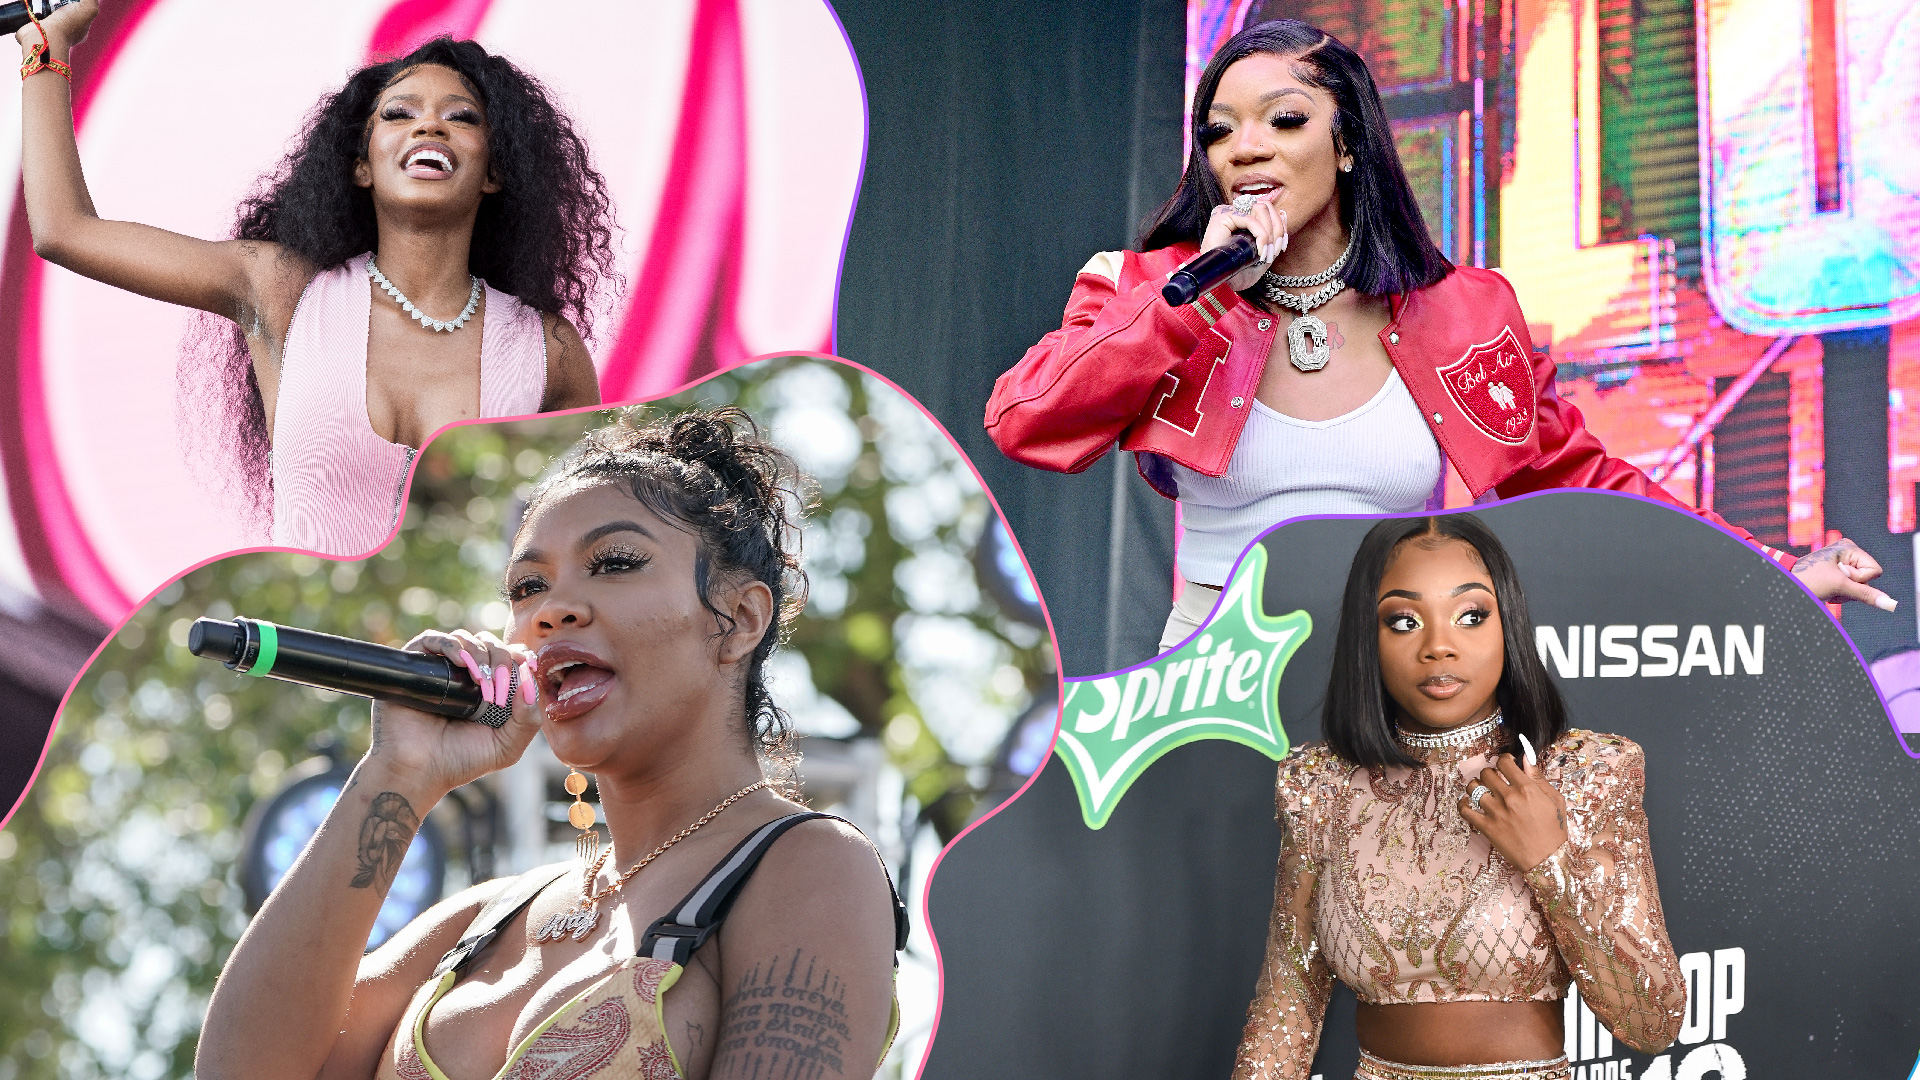 Monaleo, Chinese Kitty, And Other Black Girls To Watch At Rolling Loud New York